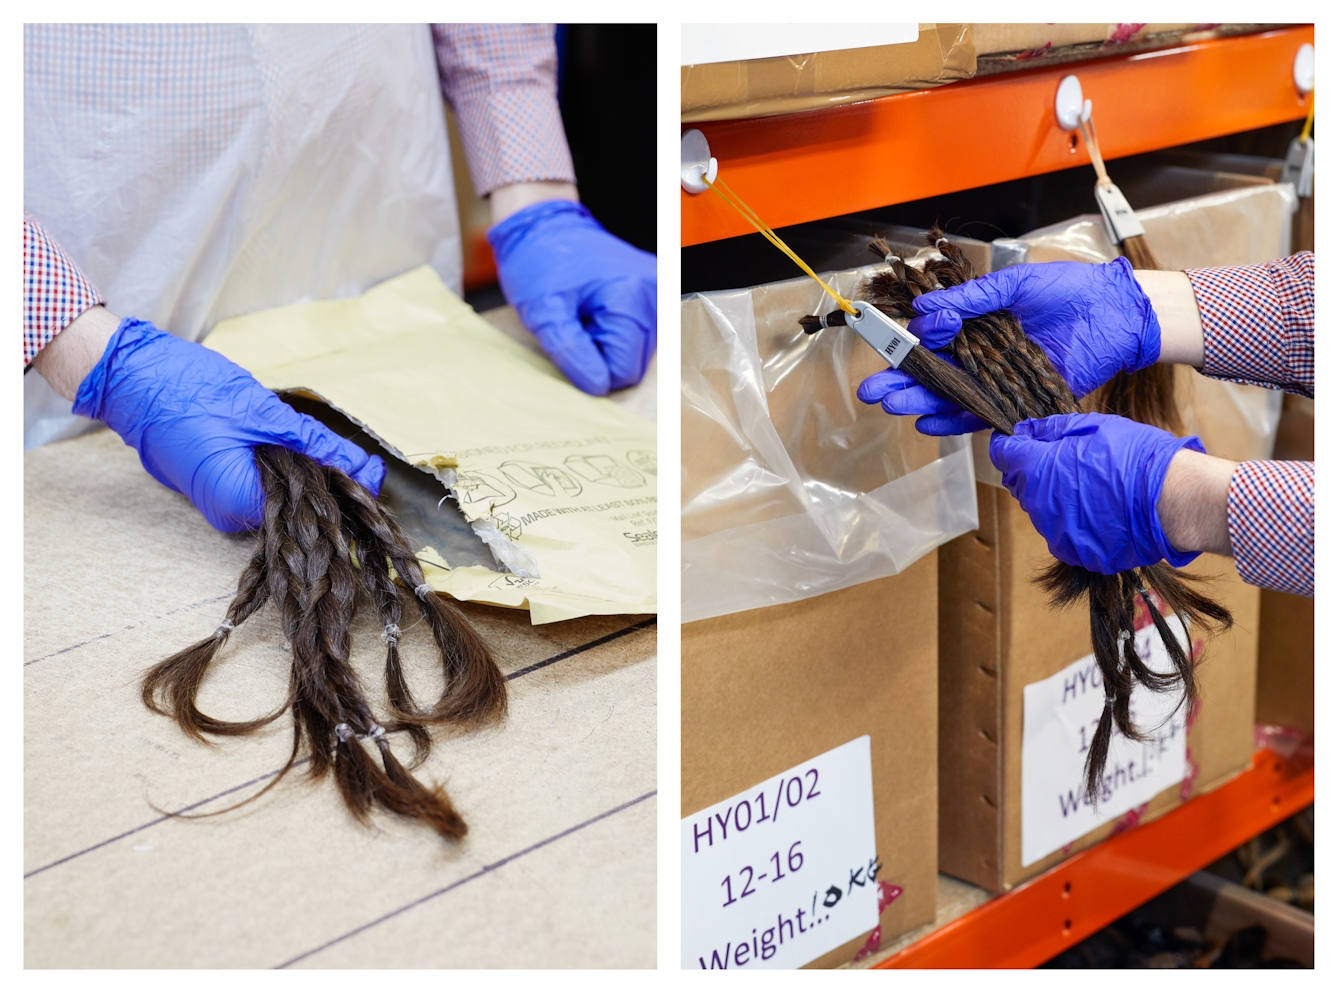 Photographic diptych. The image on the left show a close-up of a tabletop on which is an opened padded envelope. Standing behind the table is a person wearing purple latex gloves, a shite plastic apron and a checked cotton shirt. In their right hand they are holding several plaited lengths of brown hair which have come out of the envelope. The image on the right show the same person holding the plaited lengths up to a shelving unit containing labelled cardboard boxes. They are comparing the plaited hair to a sample of hair hanging off the shelving.